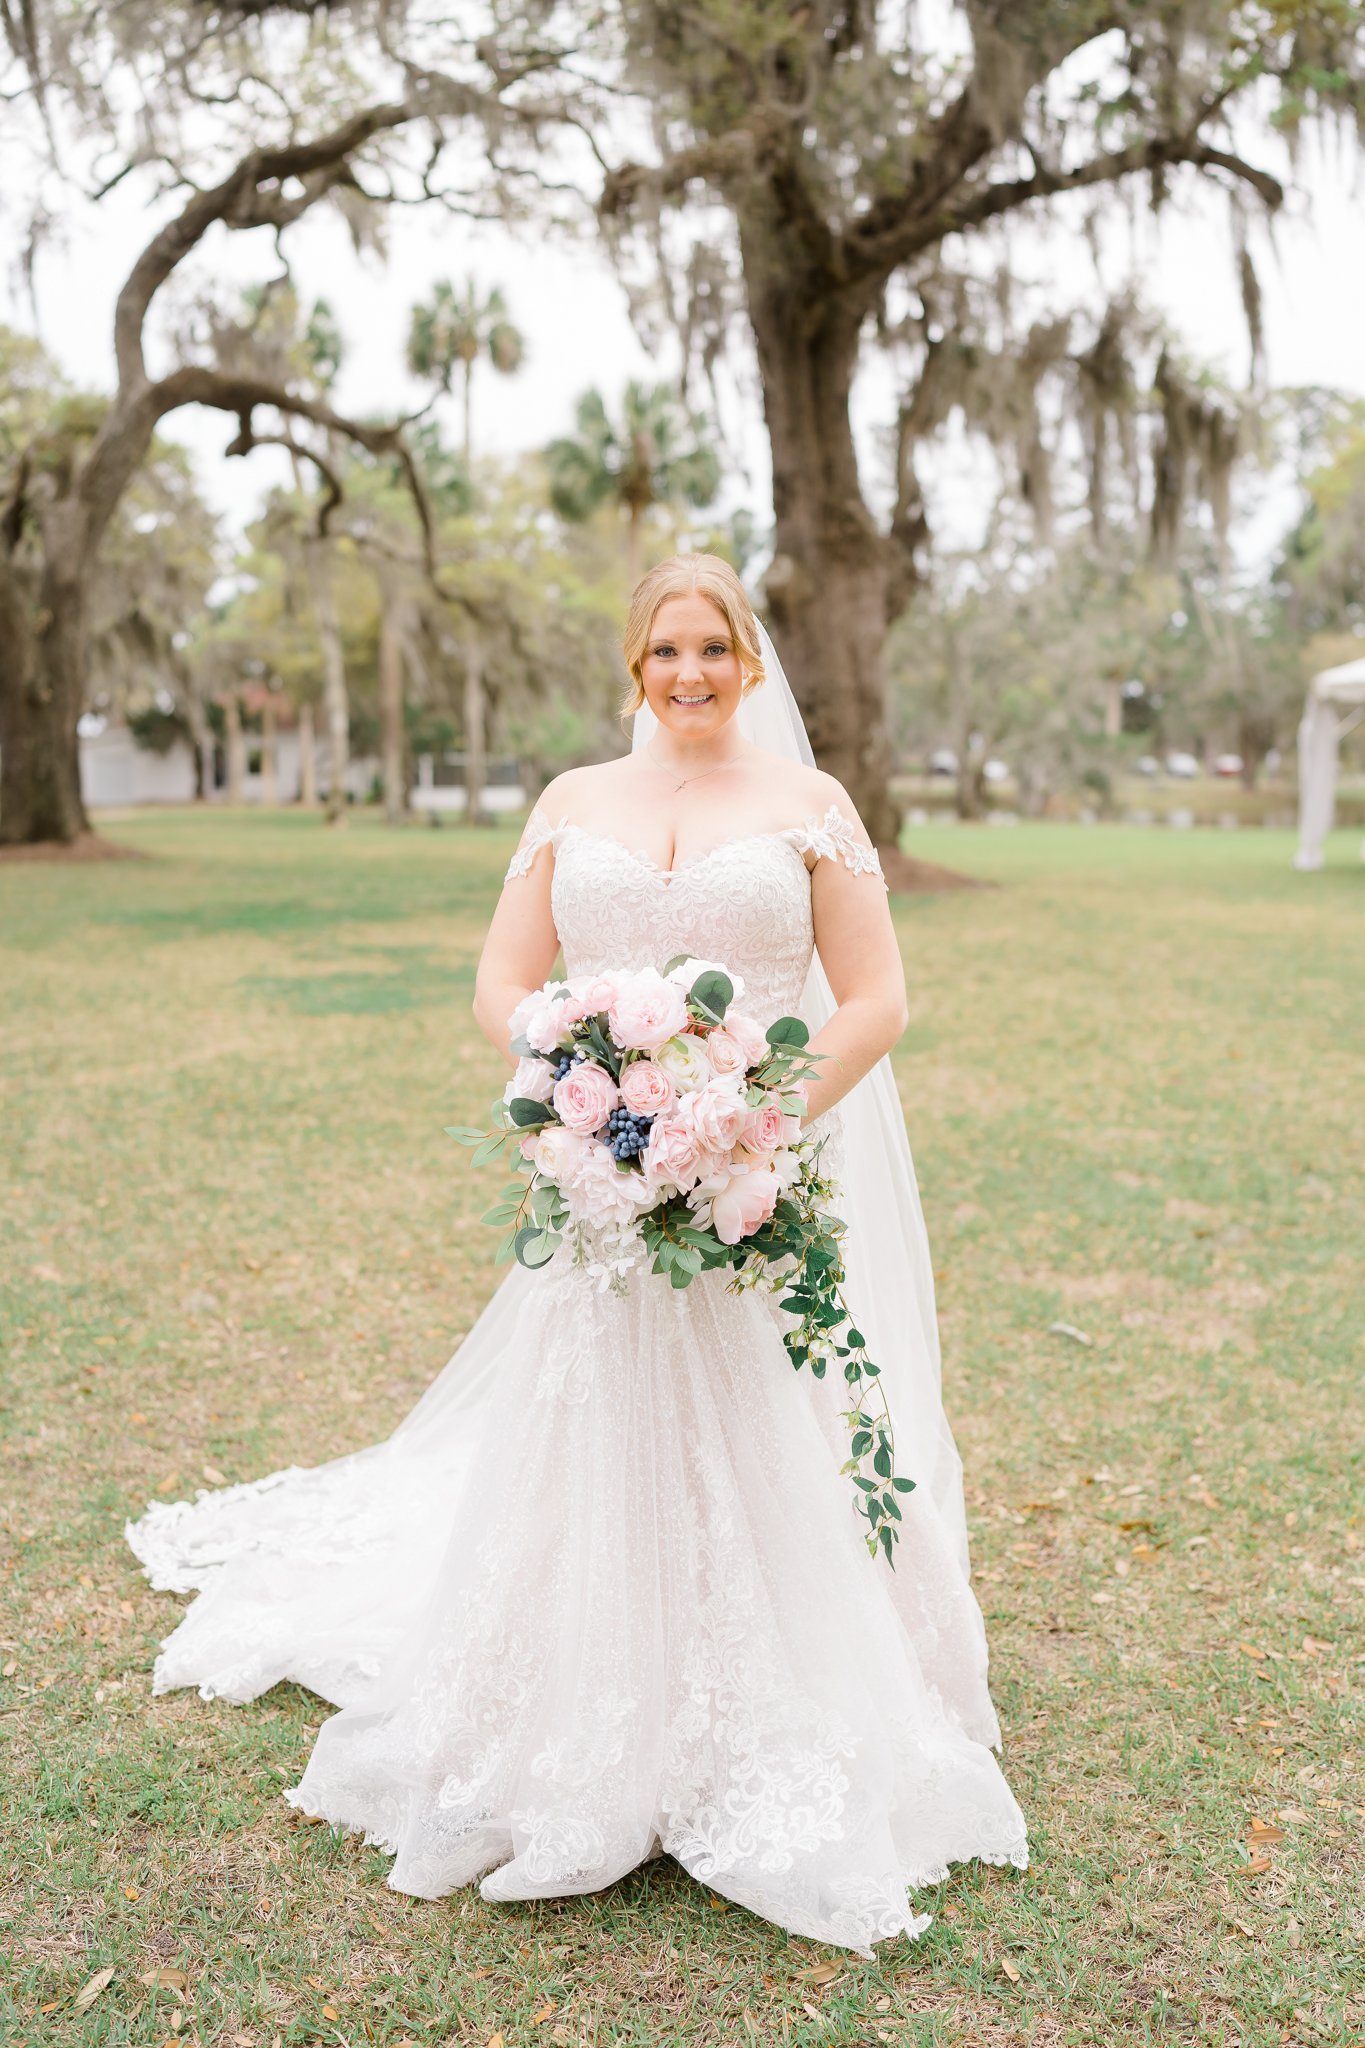 ivory-and-beau-blog-real-bride-down-for-the-gown-taylor-savannah-bride-maggie-sottero-wedding-dress-savannah-bridal-shop-savannah-bridal-boutique-mermaid-wedding-dress-savannah-georgia-EMP_LR_221.jpg